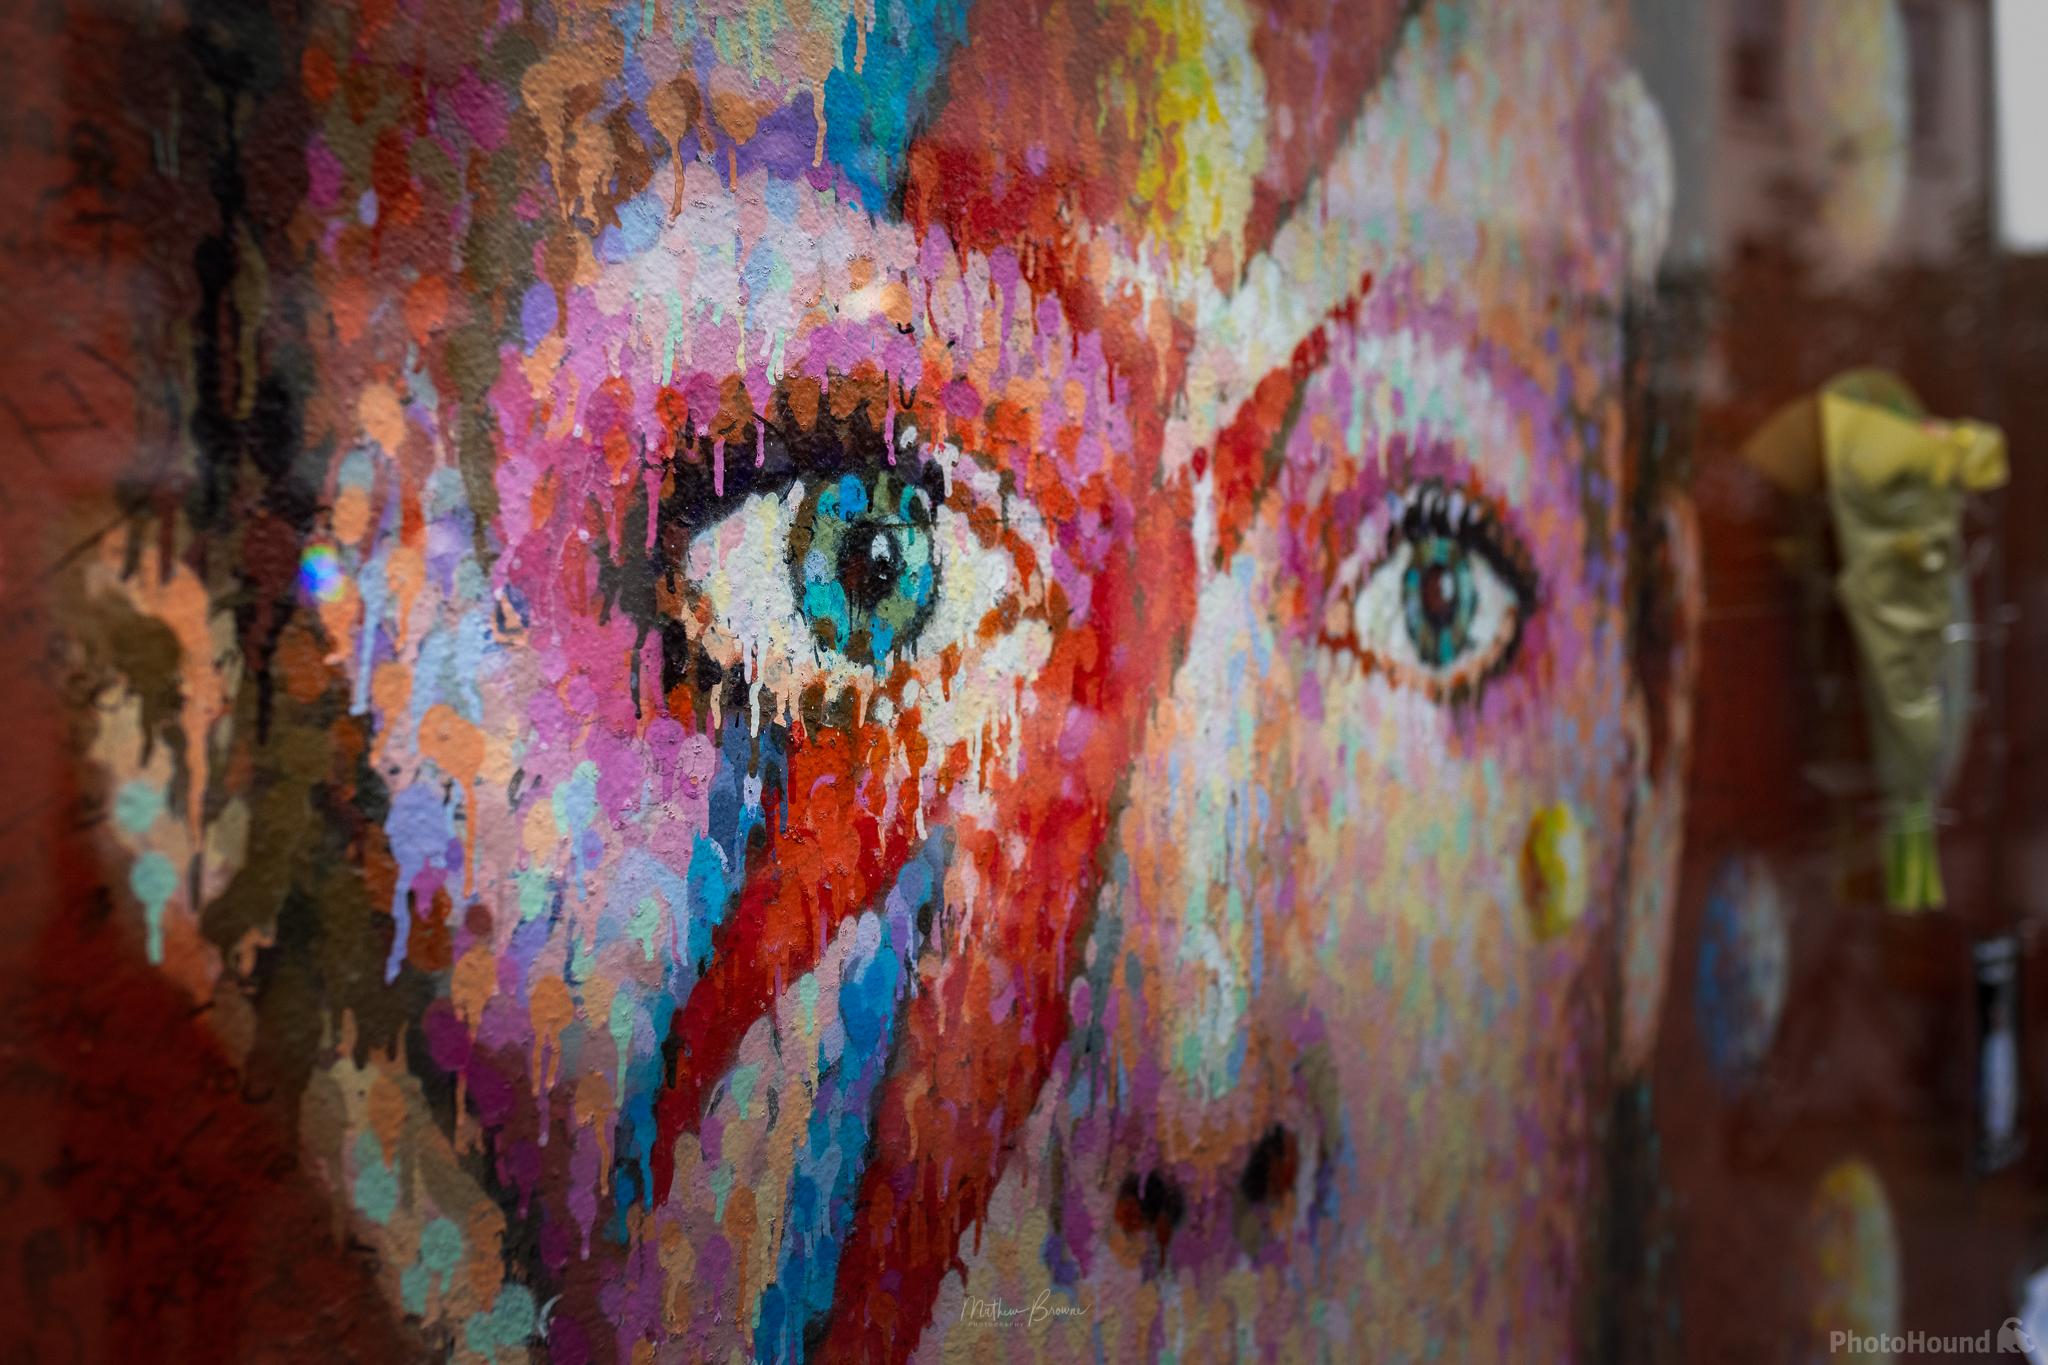 Image of David Bowie Mural by Mathew Browne